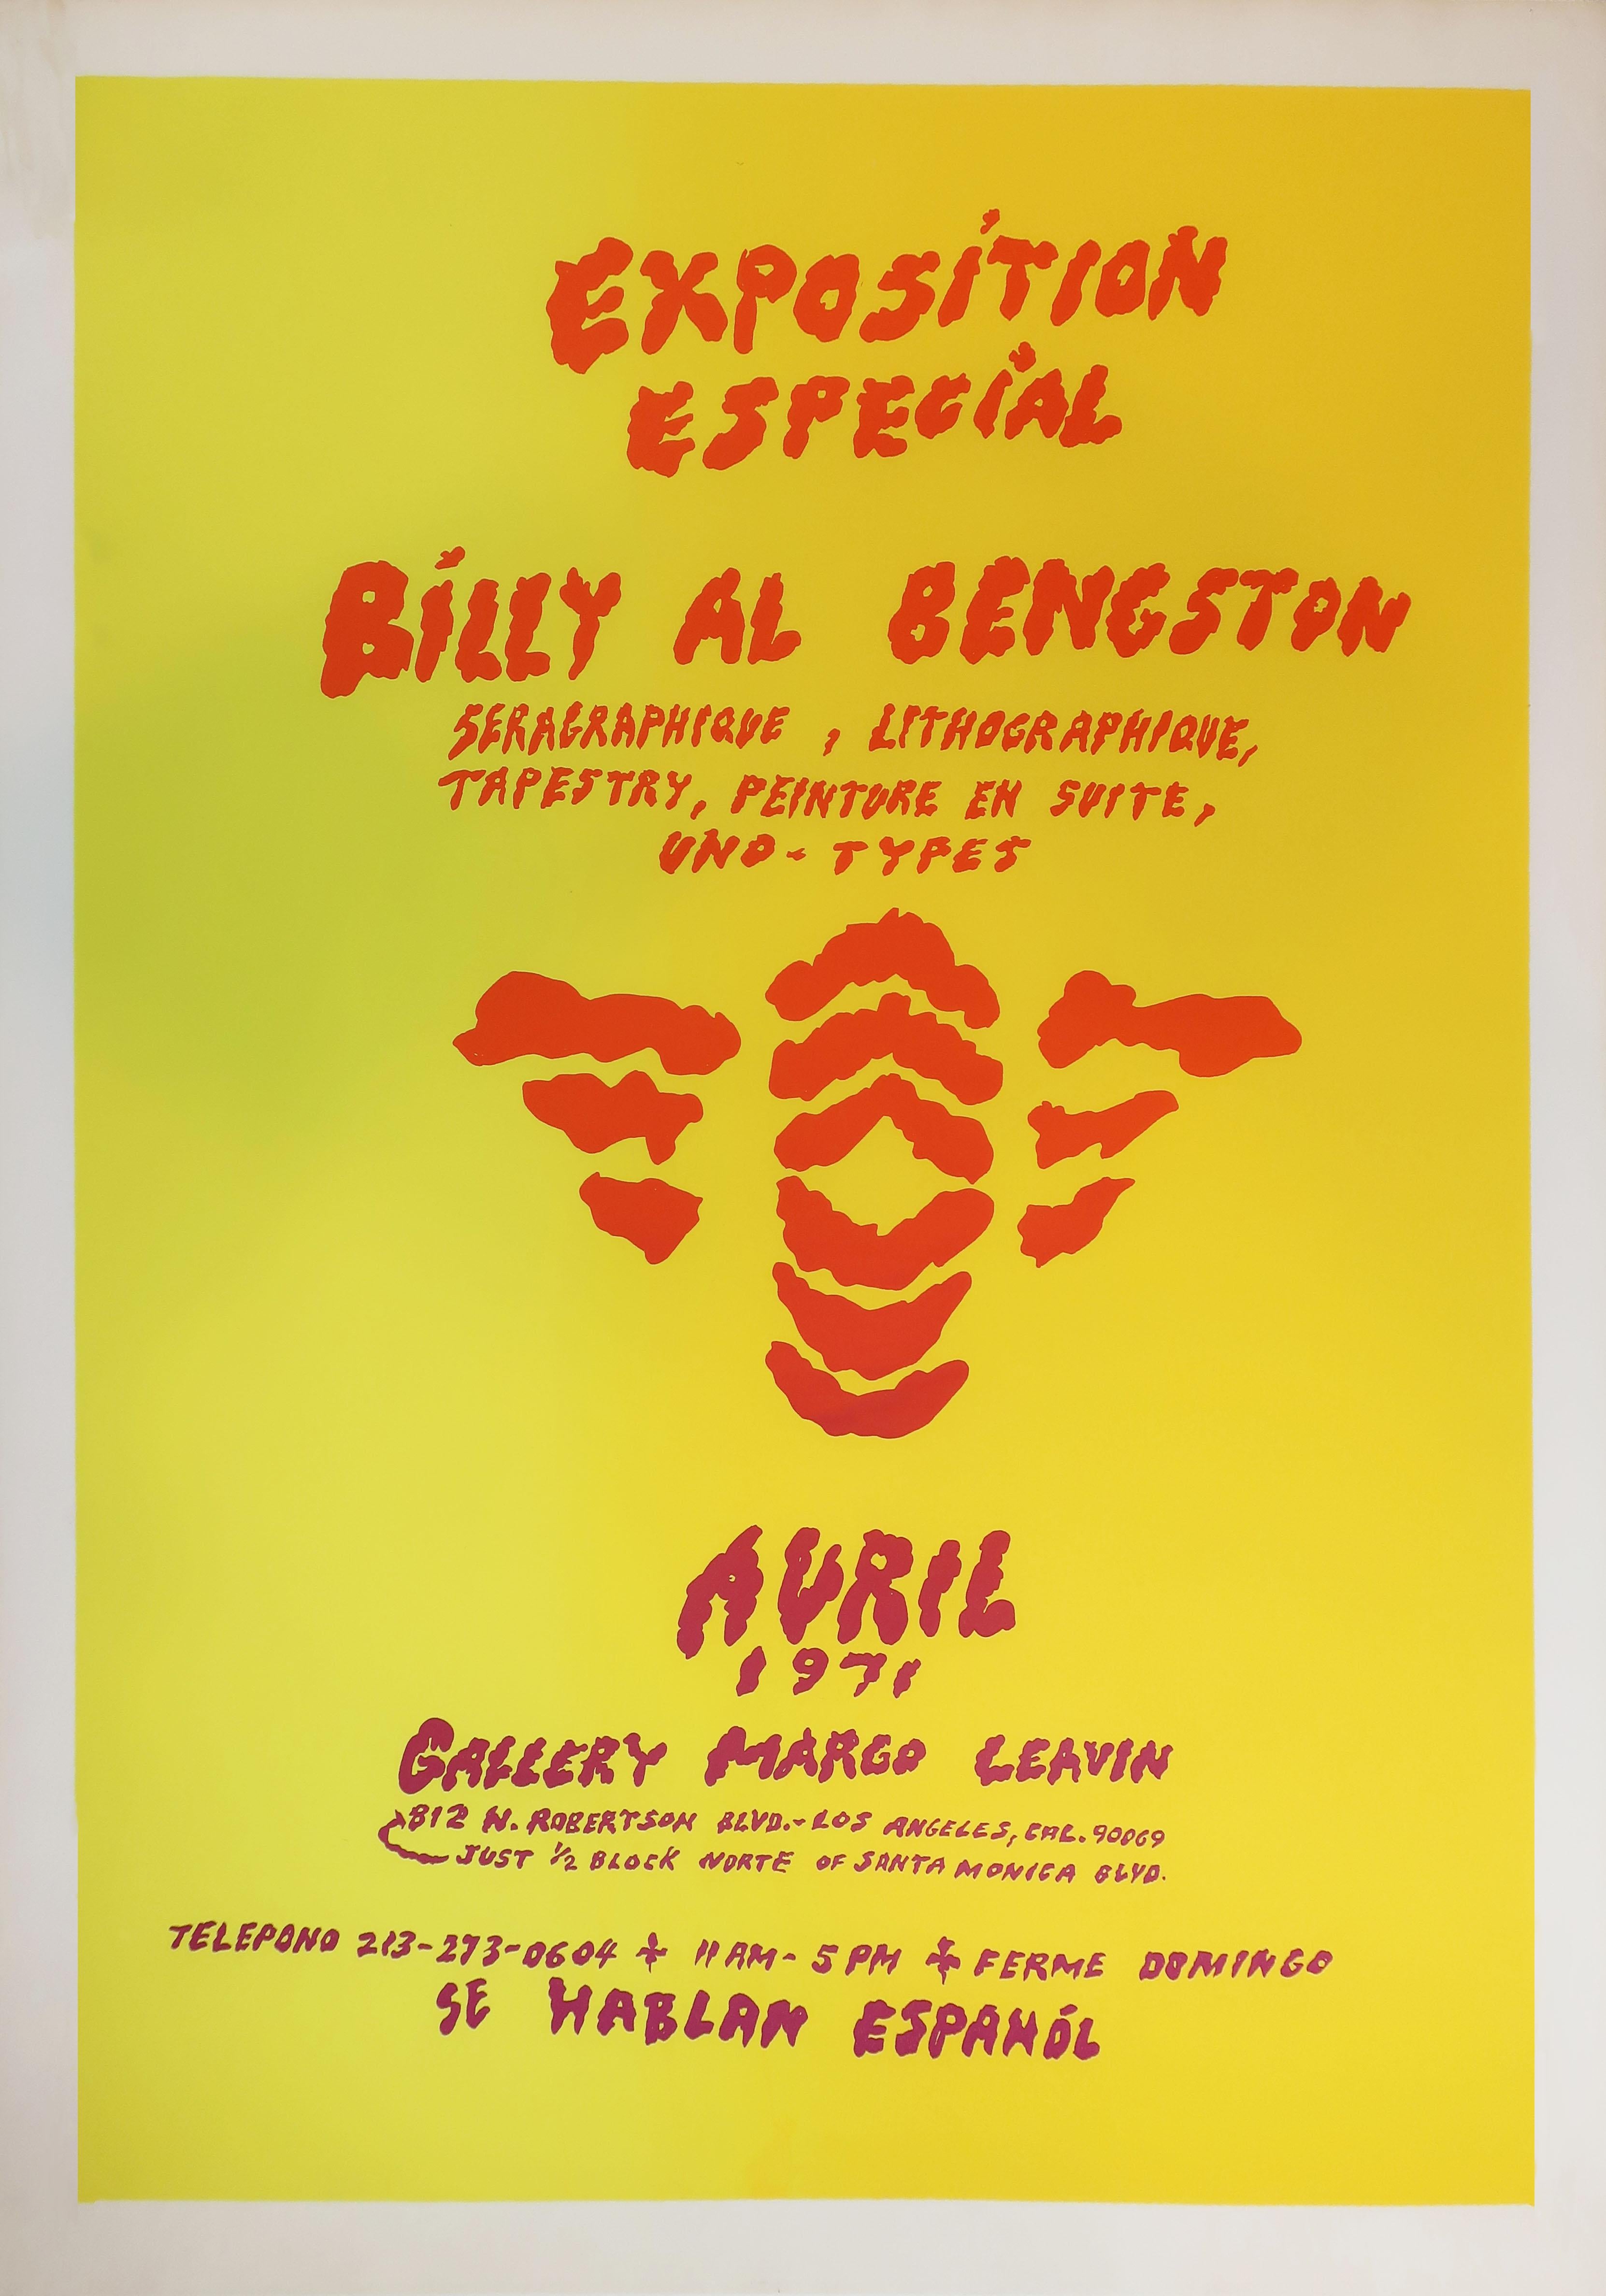 Billy Al Bengston Print – Exposition Especial Seragraphique, Lithographie, Wandteppich